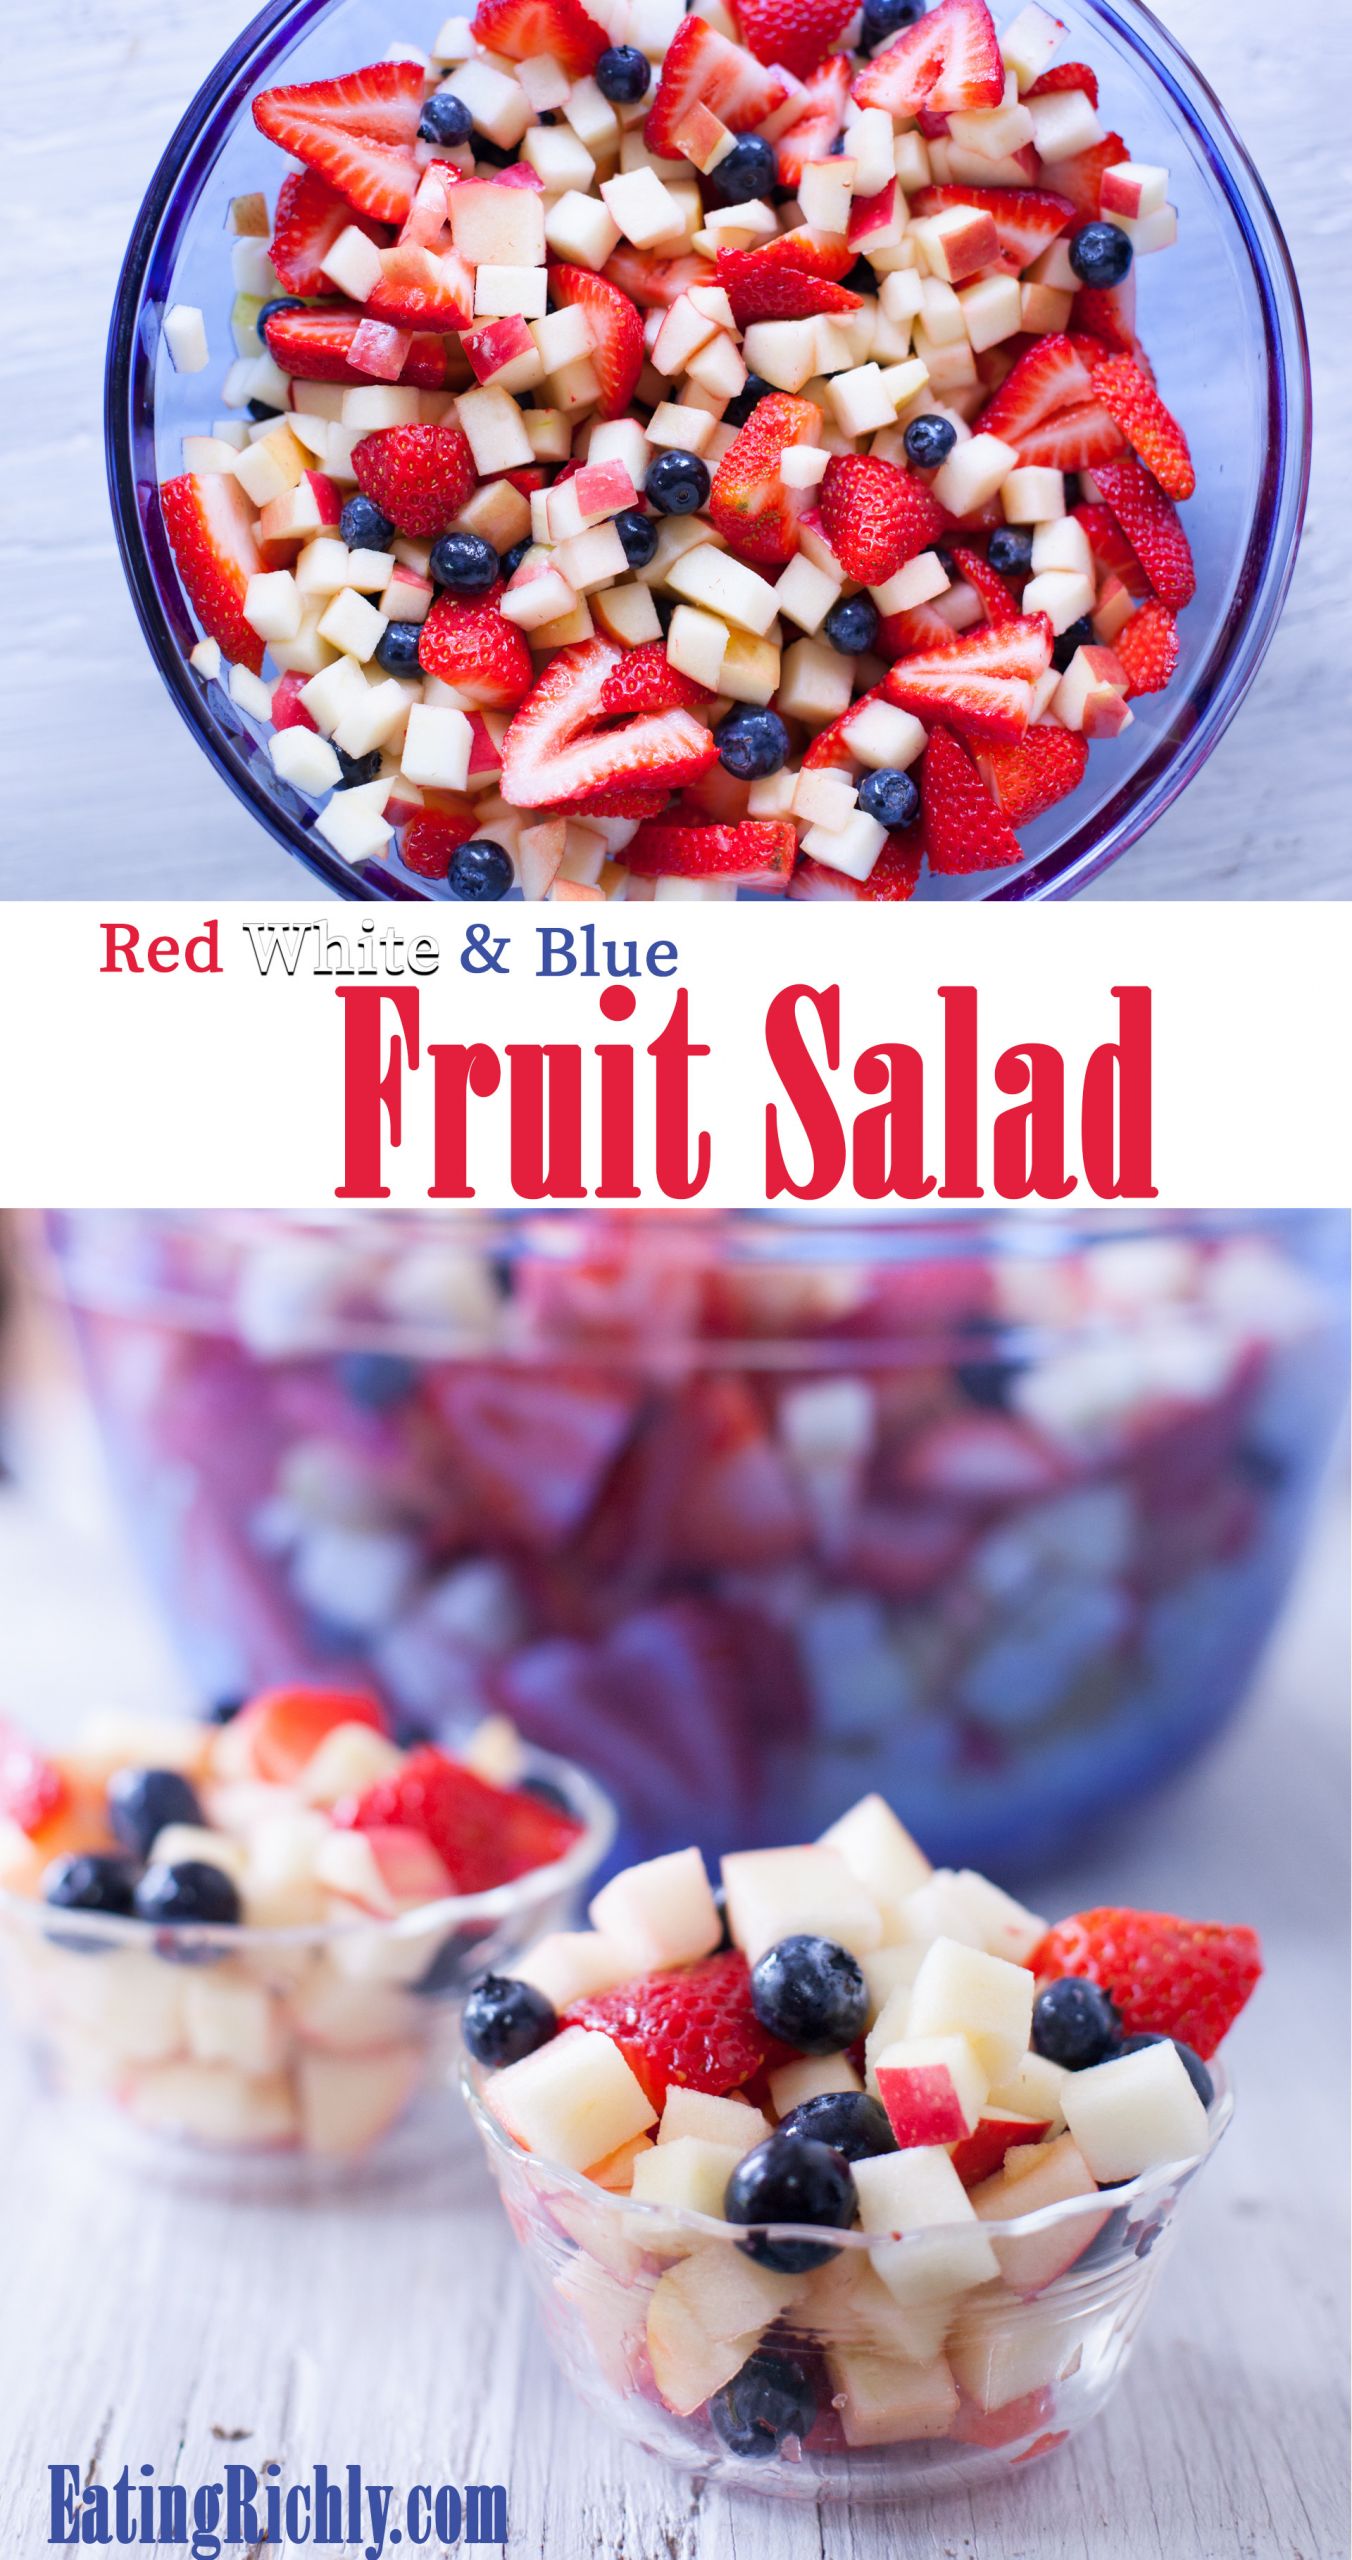 Red White And Blue Desserts Recipes
 Easy Red White and Blue Fruit Salad Recipe